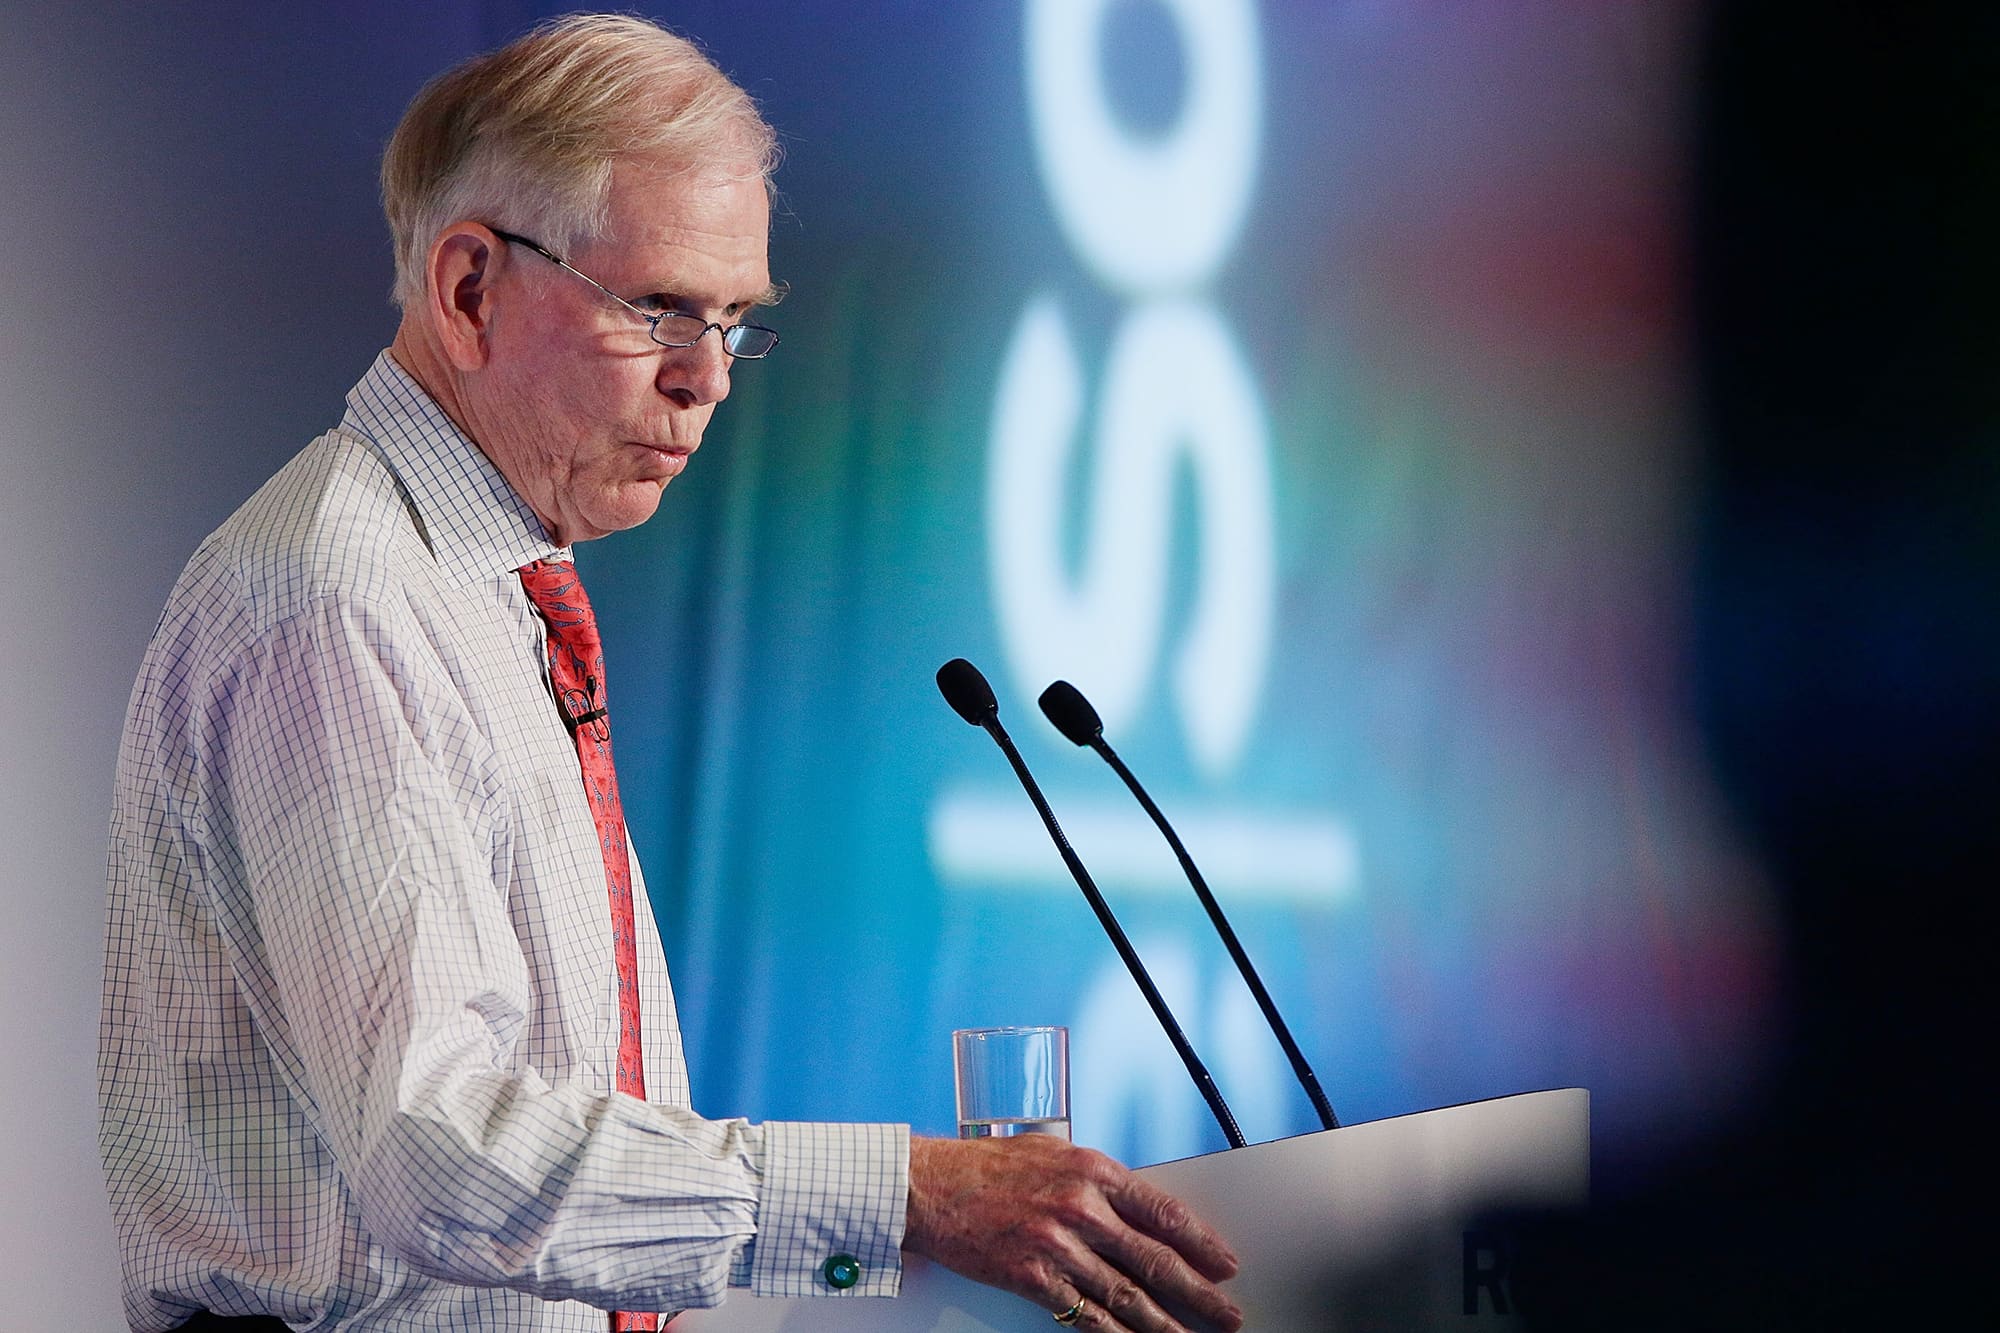 Jeremy Grantham warns eventually only the rich will procreate as chemicals leave the poor sterile